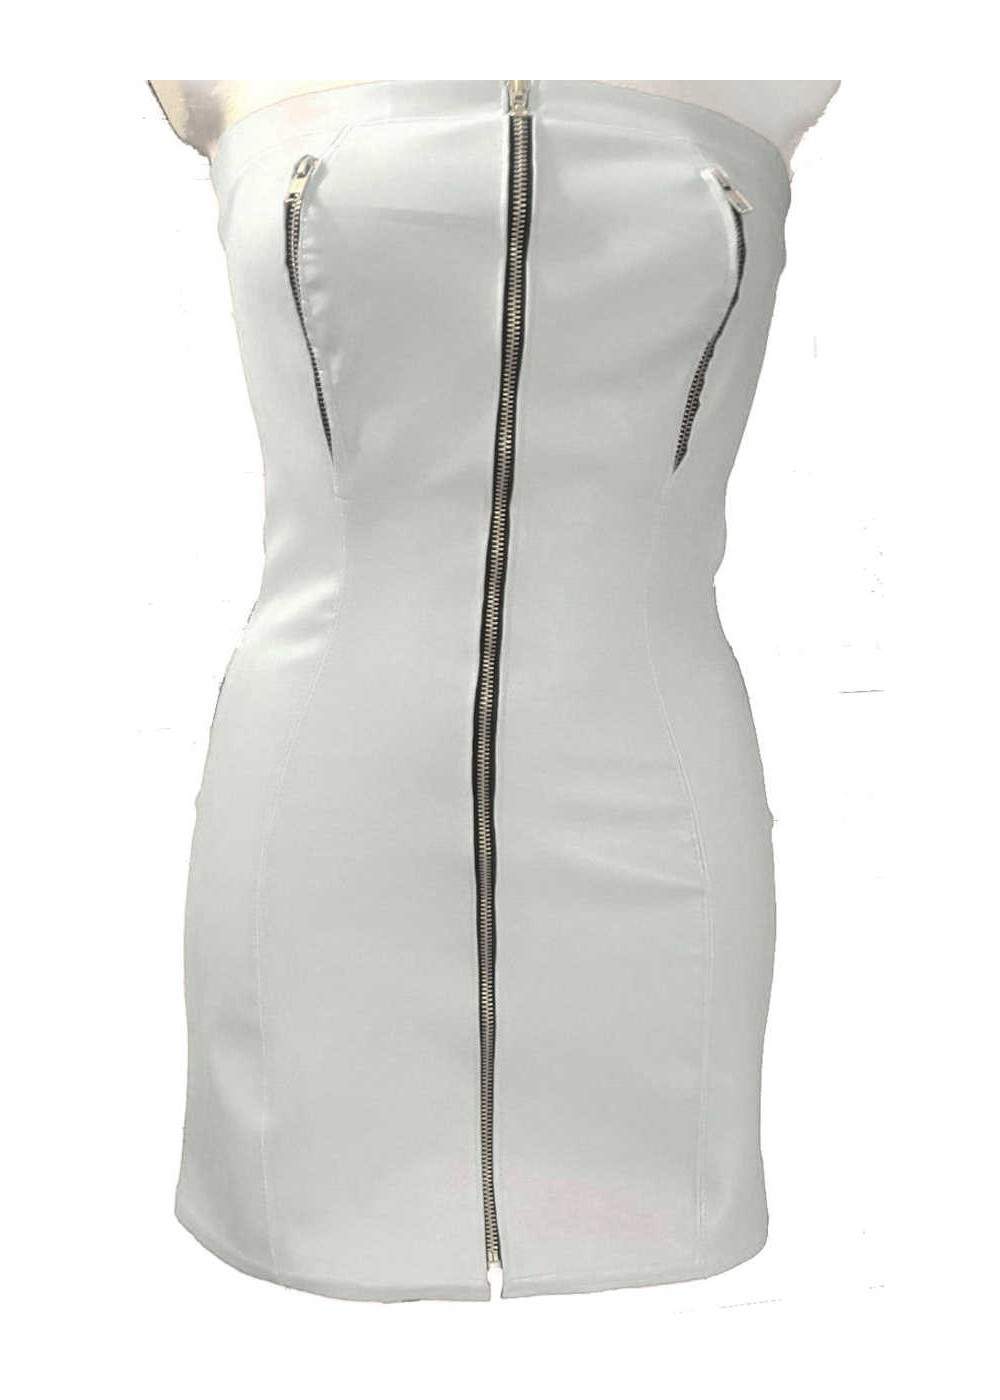 White leather dress on breasts to open with zipper